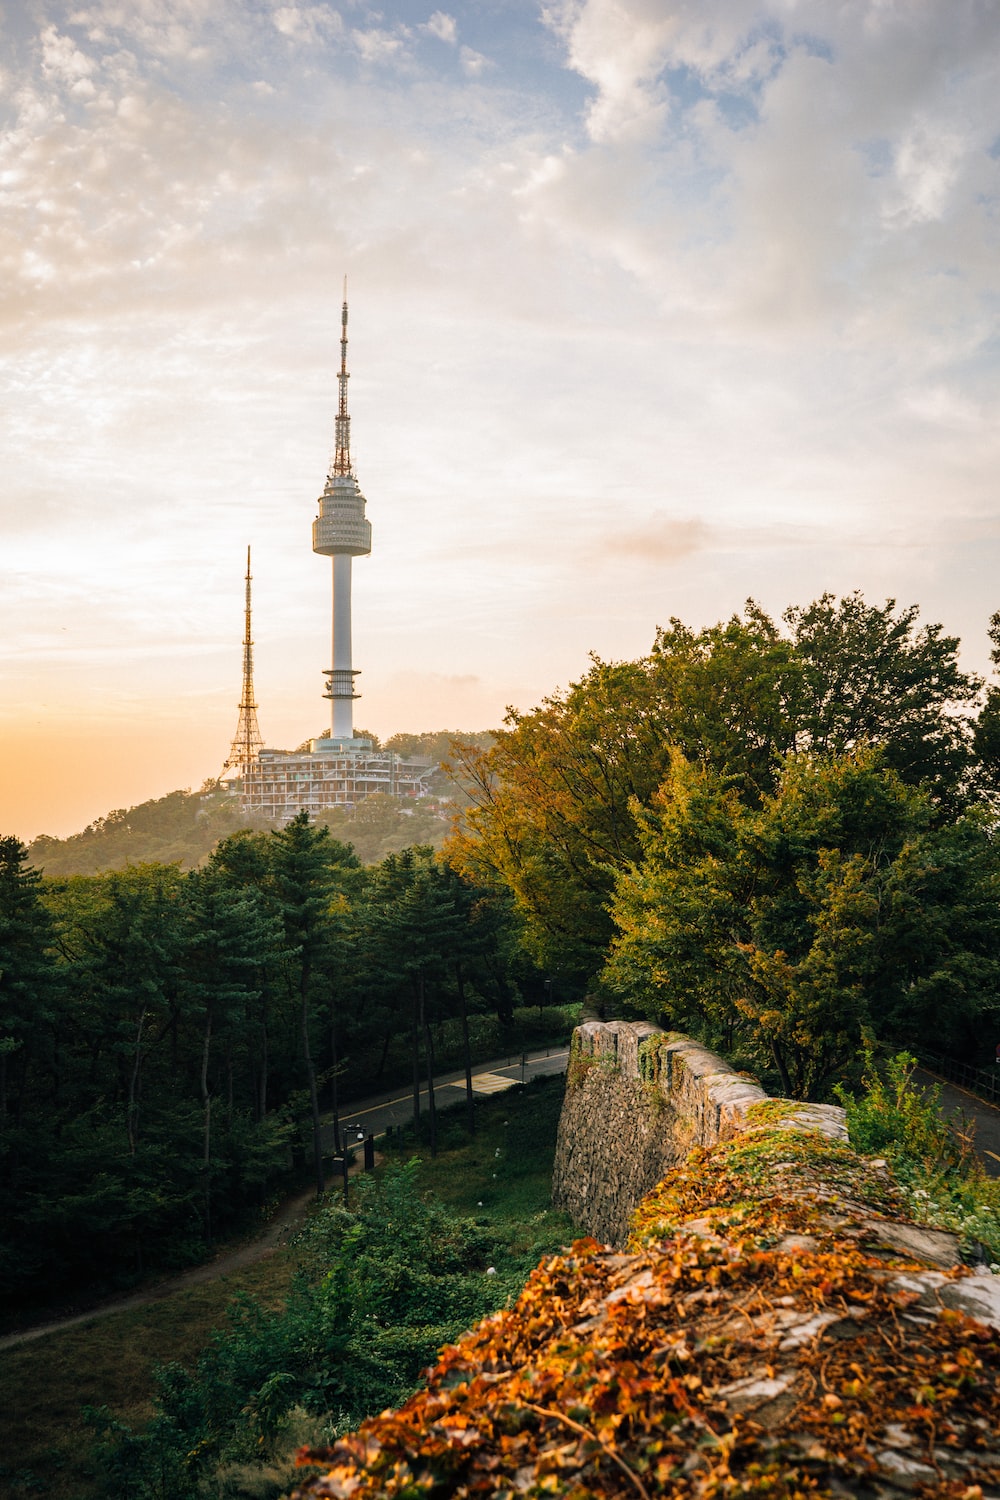 Seoul Tower Picture. Download Free Image